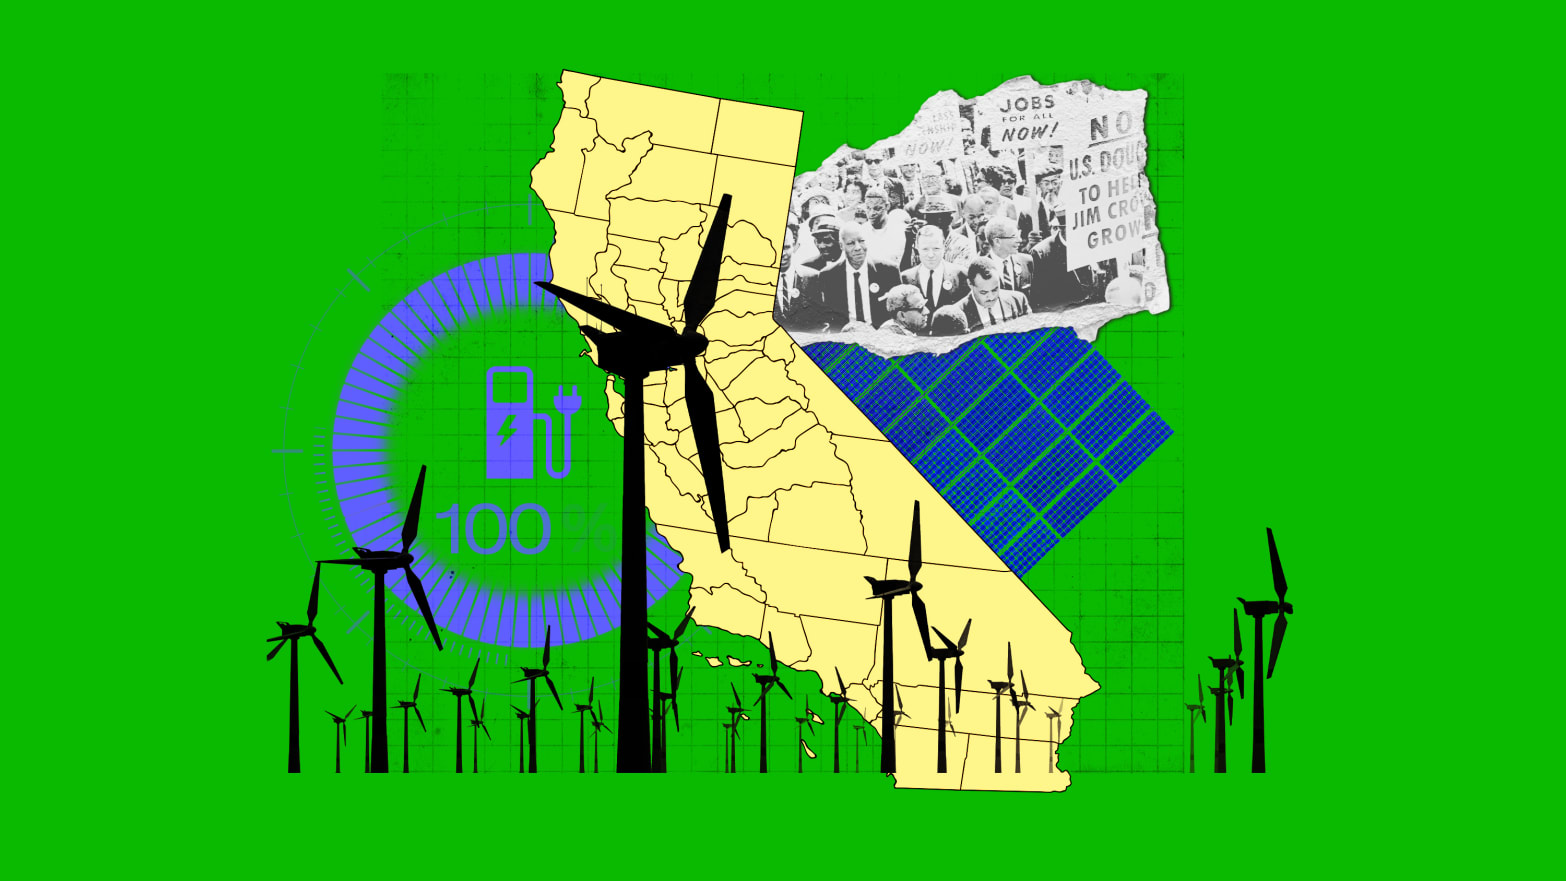 A photo illustration of California surrounded by renewable energy and archival photo of civil rights protest.